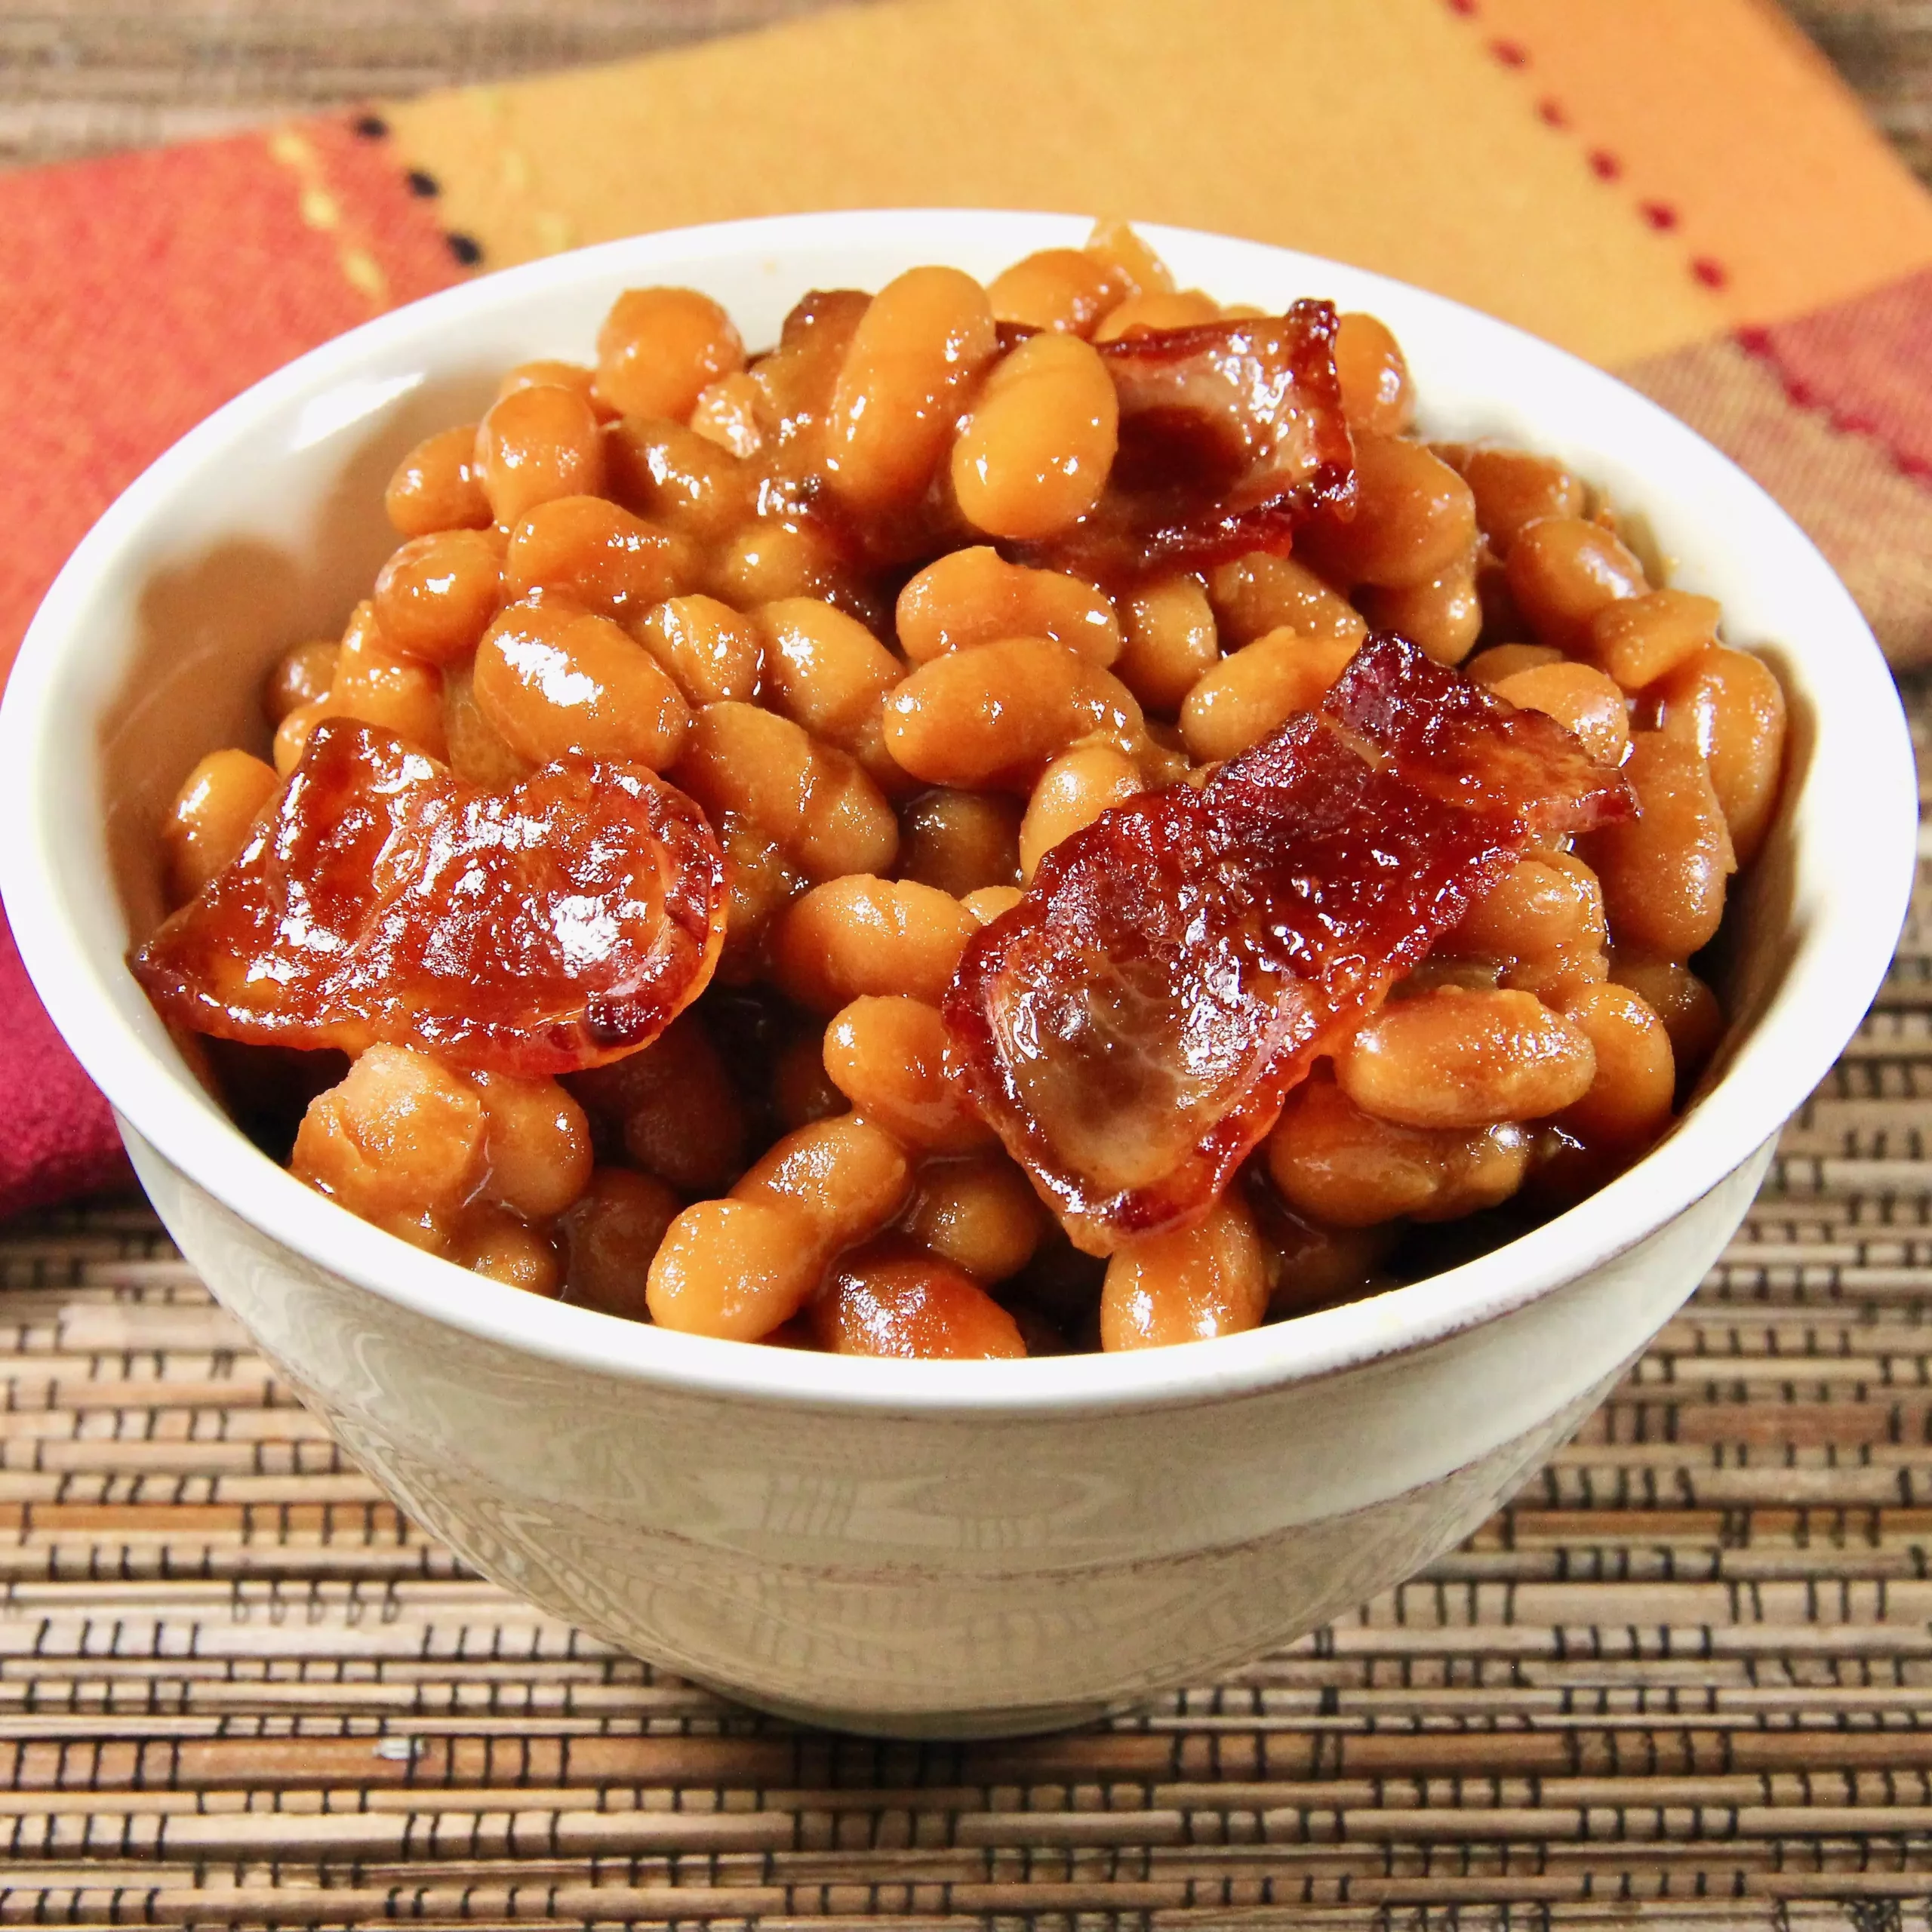 How many calories are in a cup of cooked brown beans